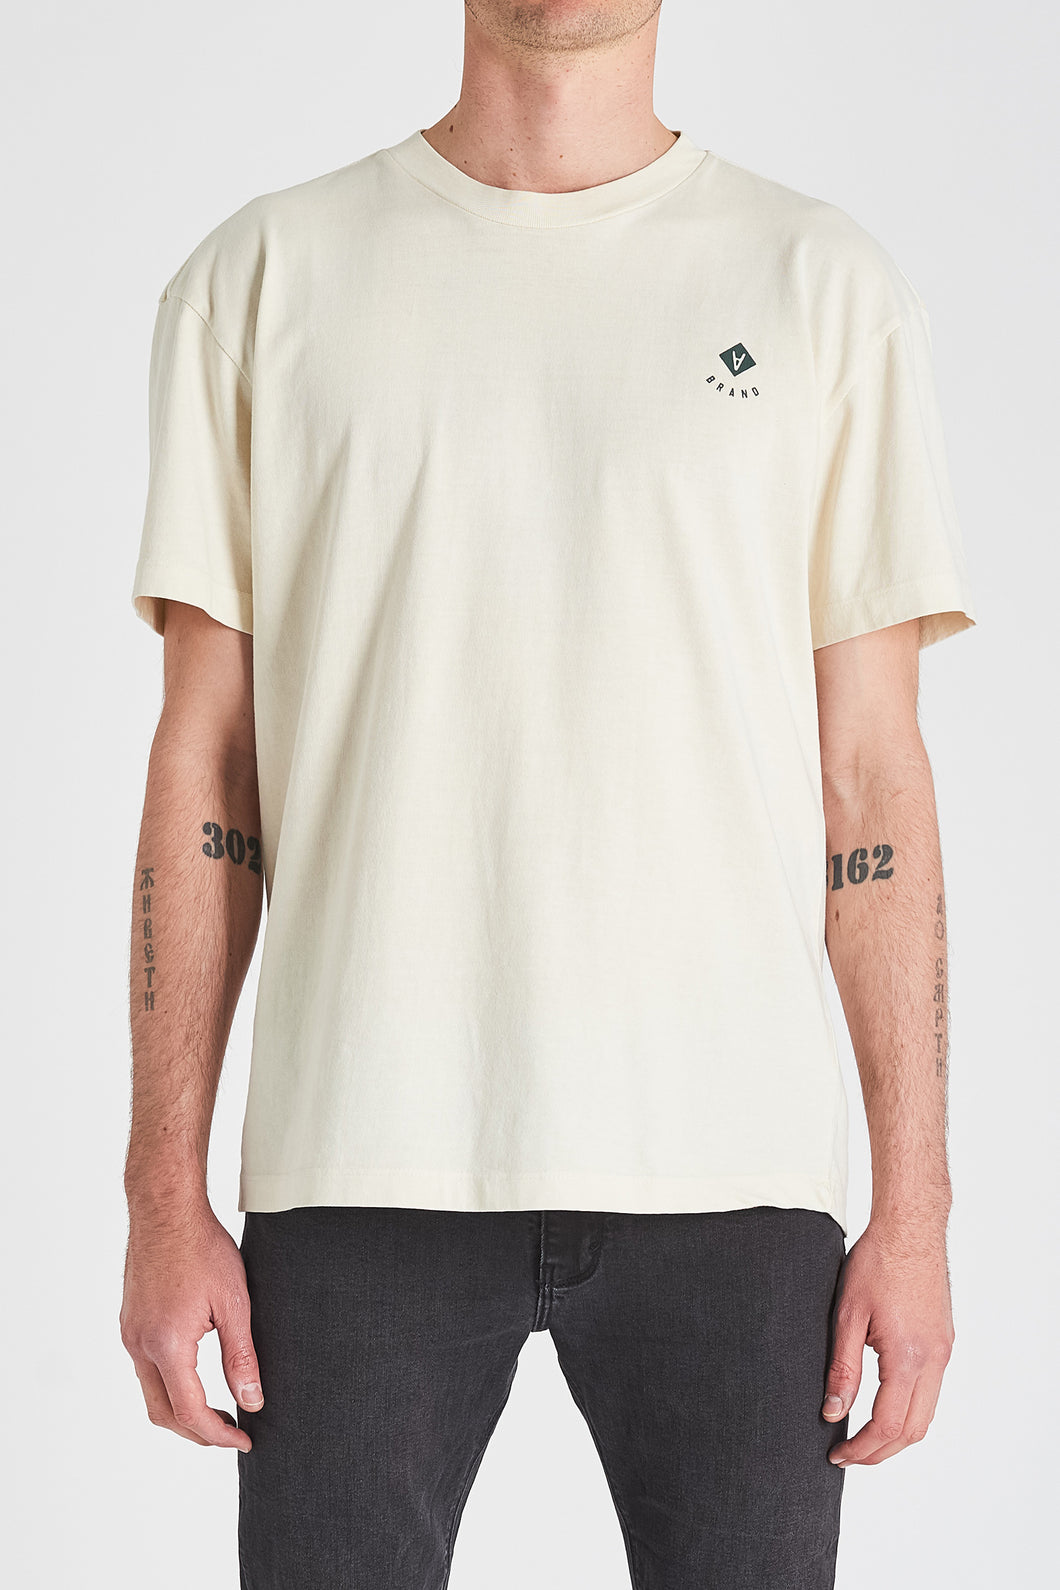 A Dropped Tee Off White